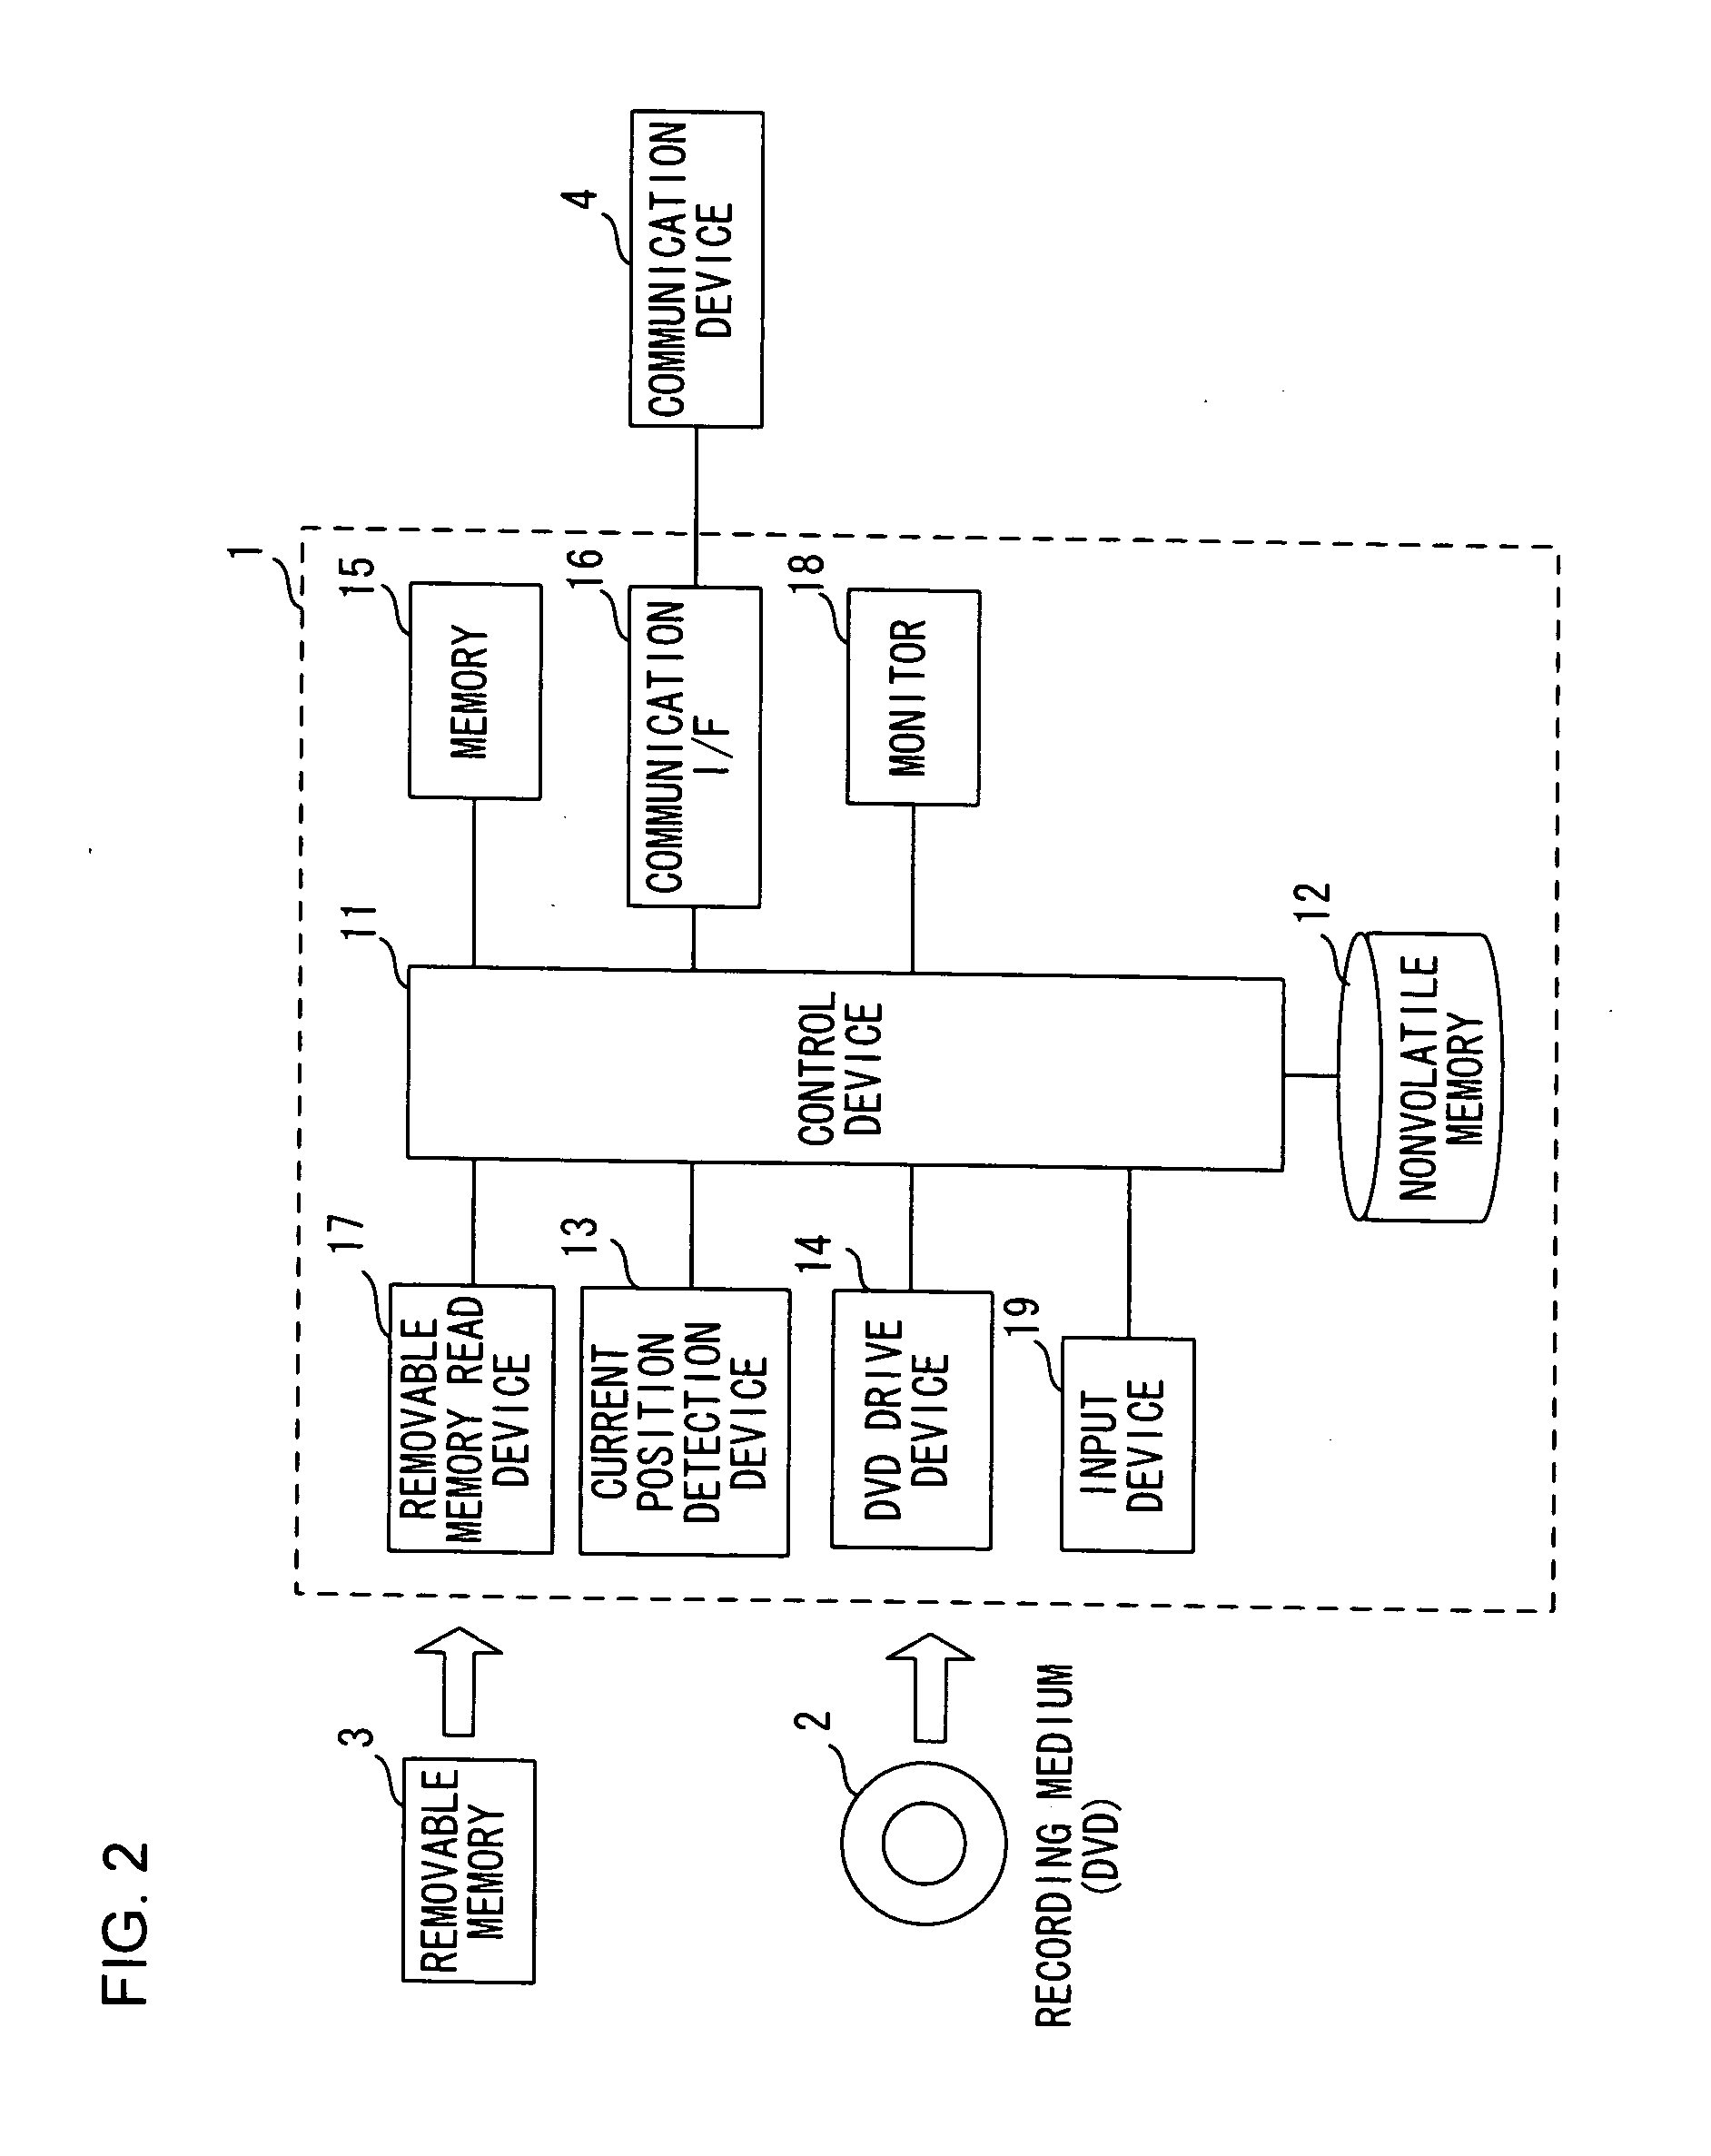 Map data product, map data processing program product, map data processing method, and map data processing device